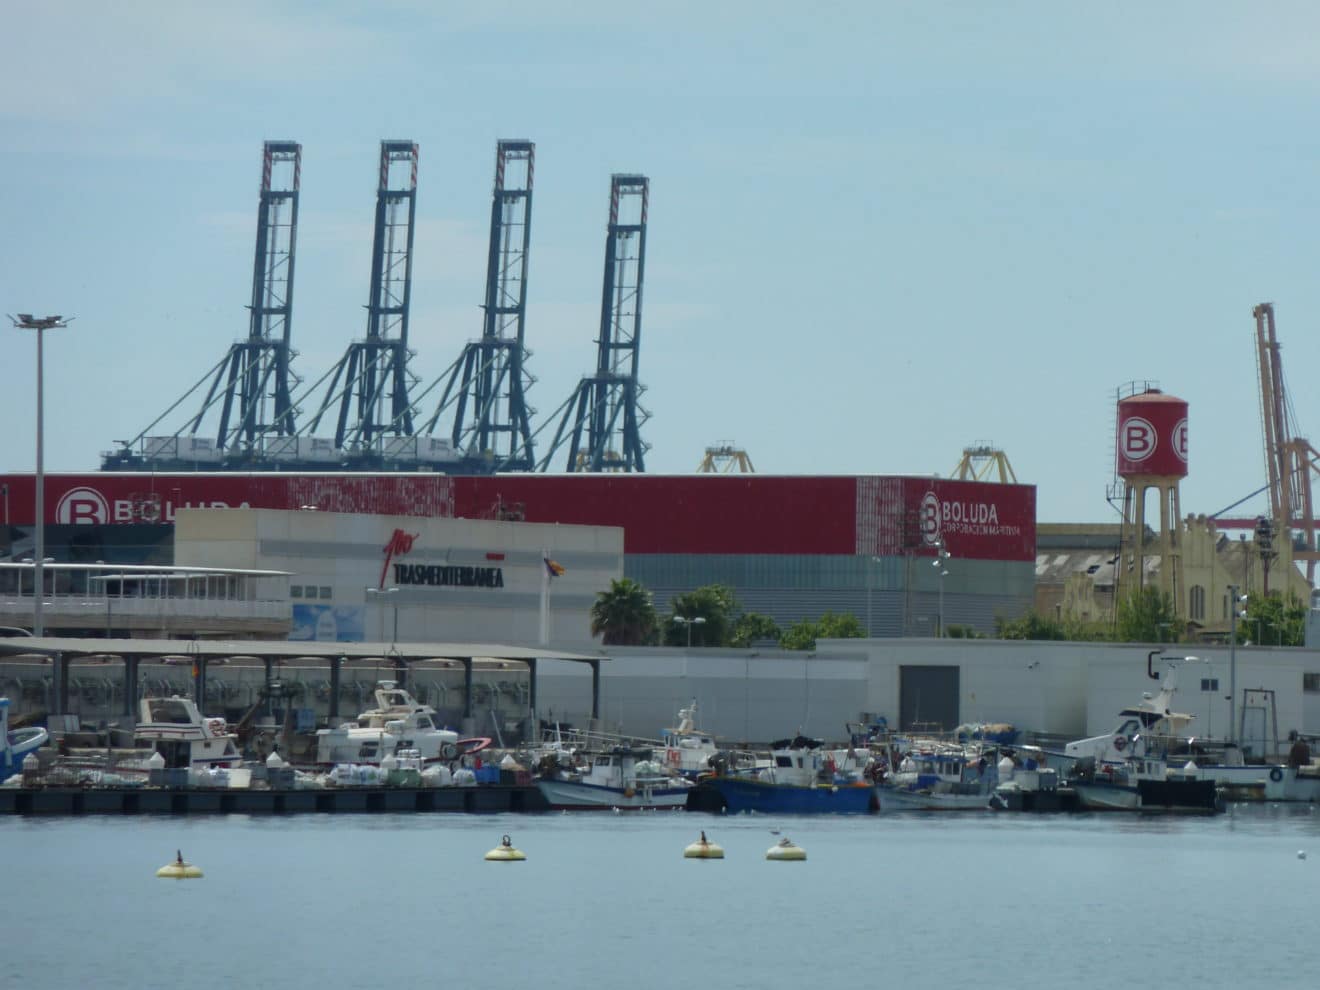 Ports Of Genoa Sees August +13.6% Increase In Cargo Traffic